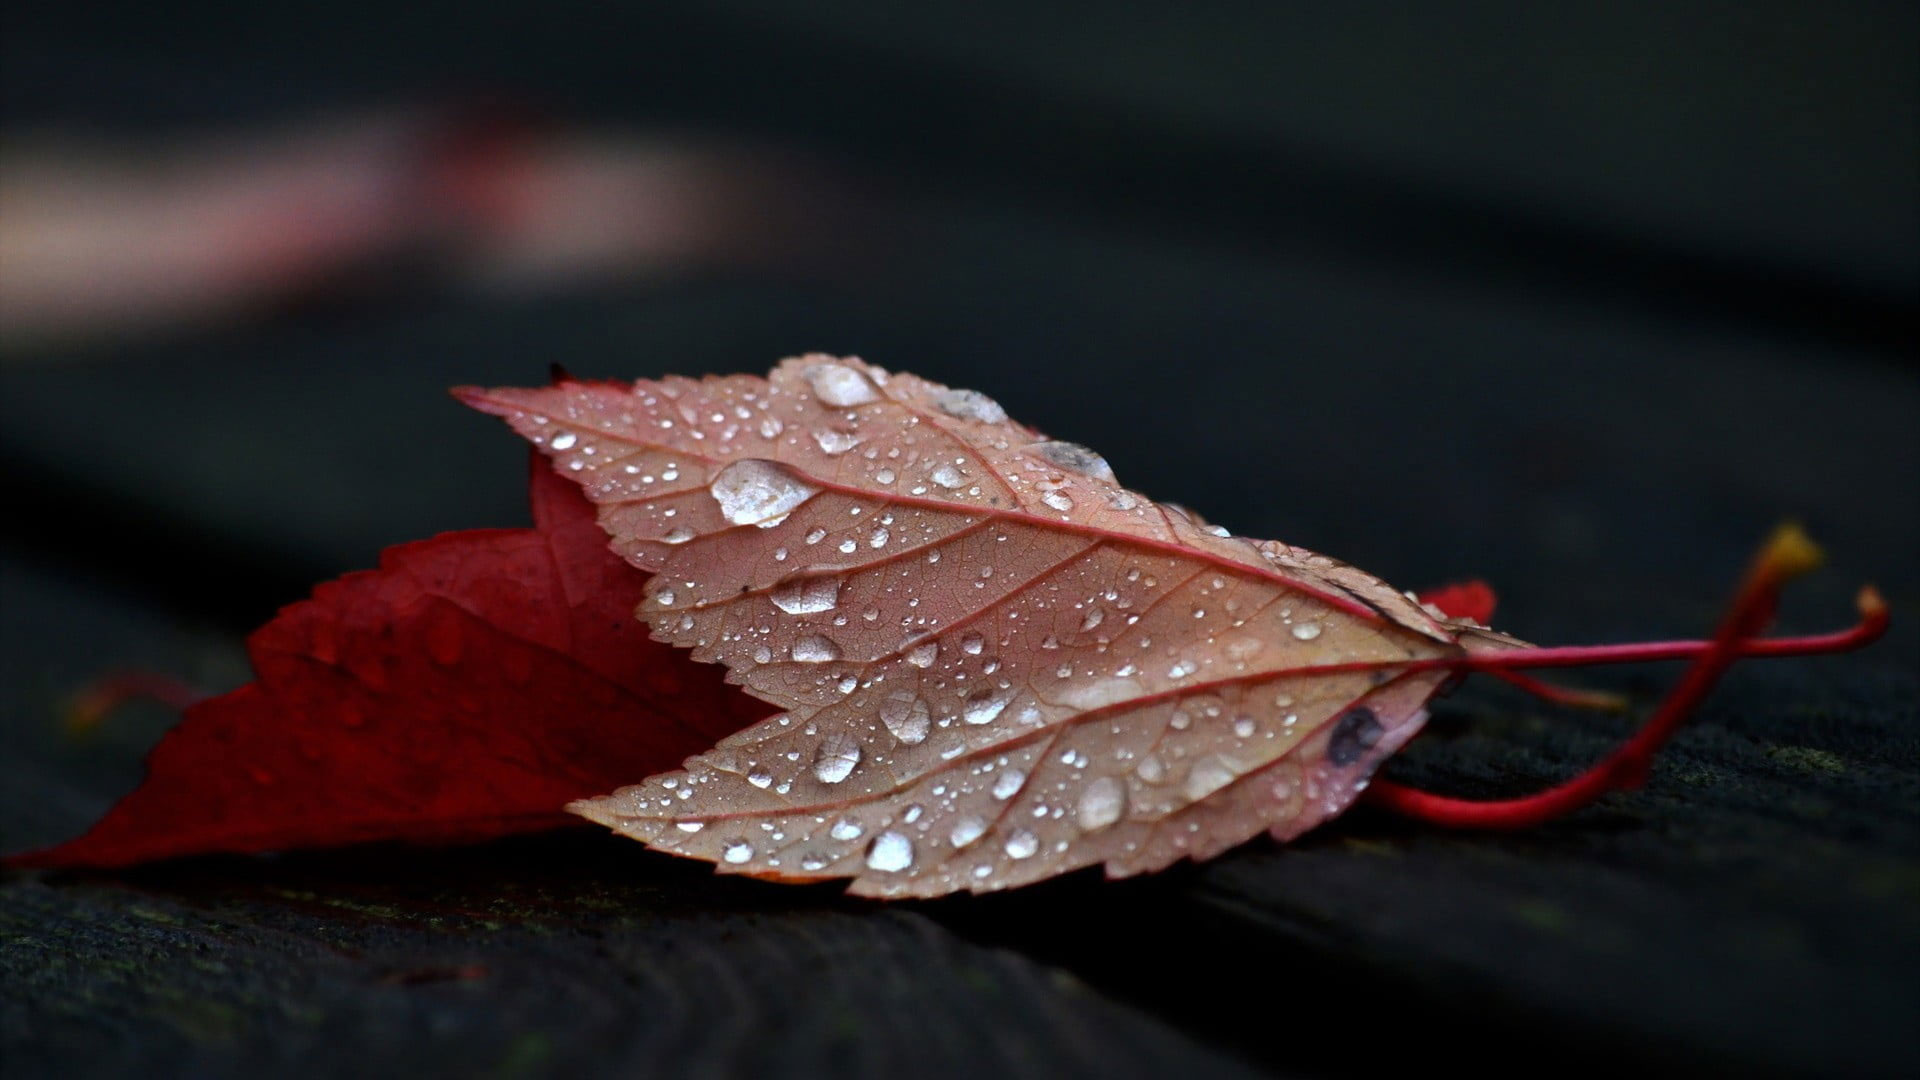 Red leafed plant wallpaper, close-up photo of red leaf with dew, nature